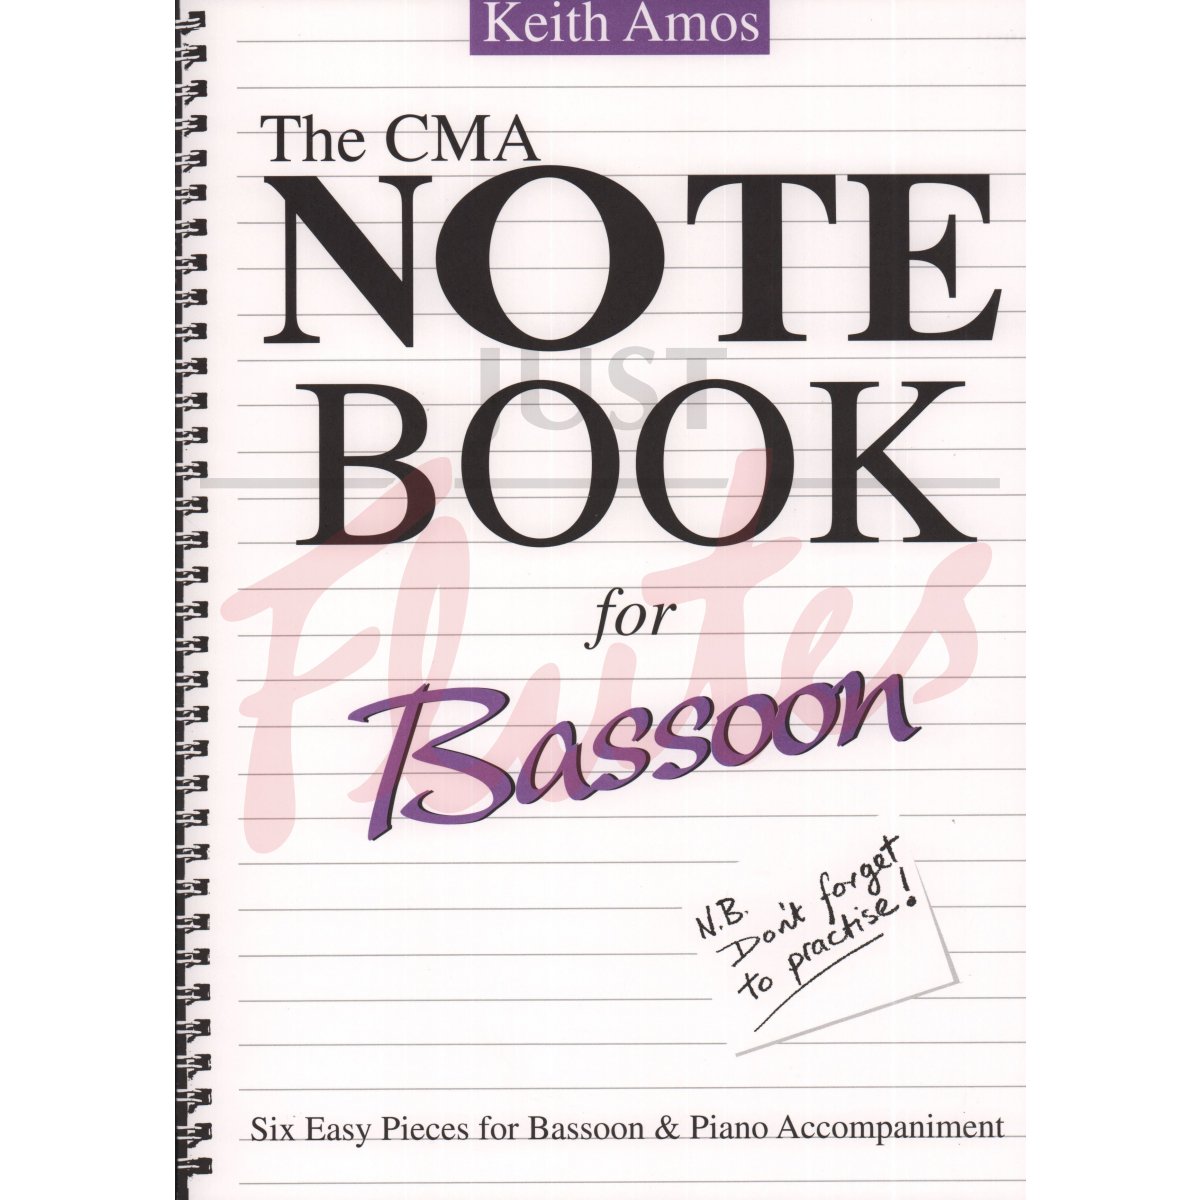 The CMA Notebook for Bassoon with Piano Accompaniment